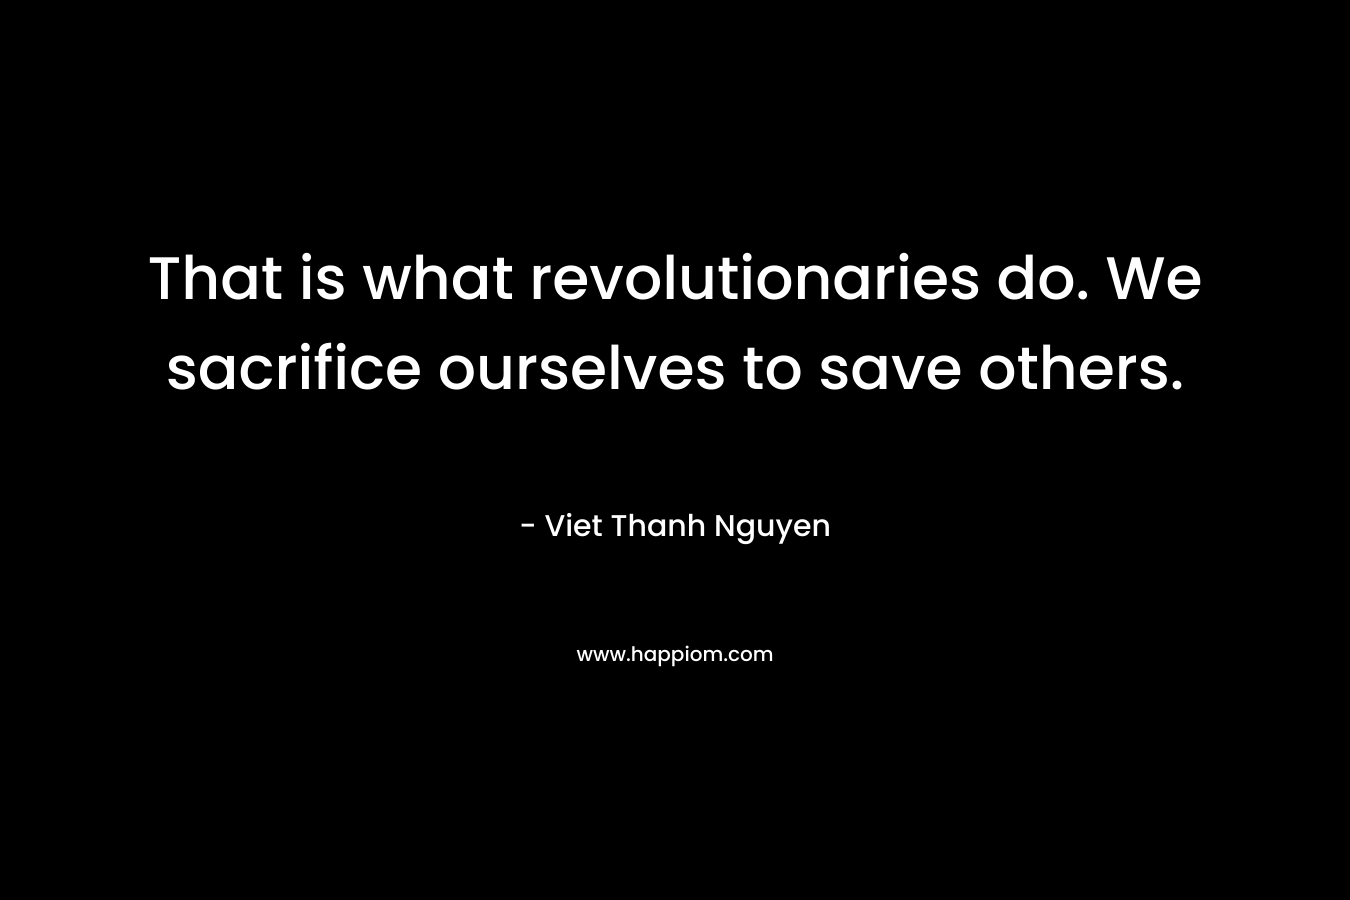 That is what revolutionaries do. We sacrifice ourselves to save others. – Viet Thanh Nguyen